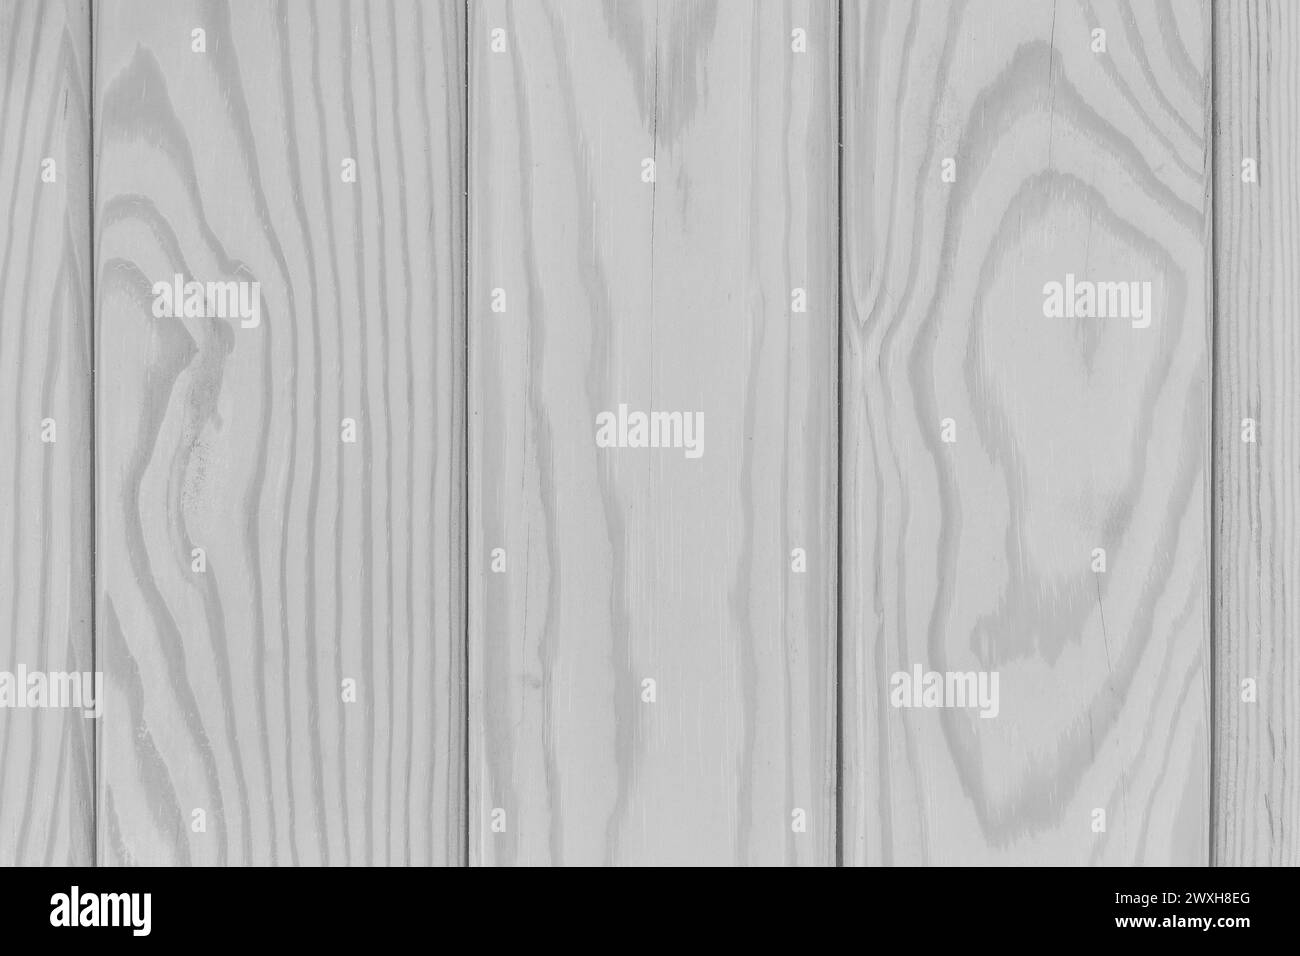 Vertical Stripe Lines White Light Grey Wood Texture Floor Board Background Pattern. Stock Photo